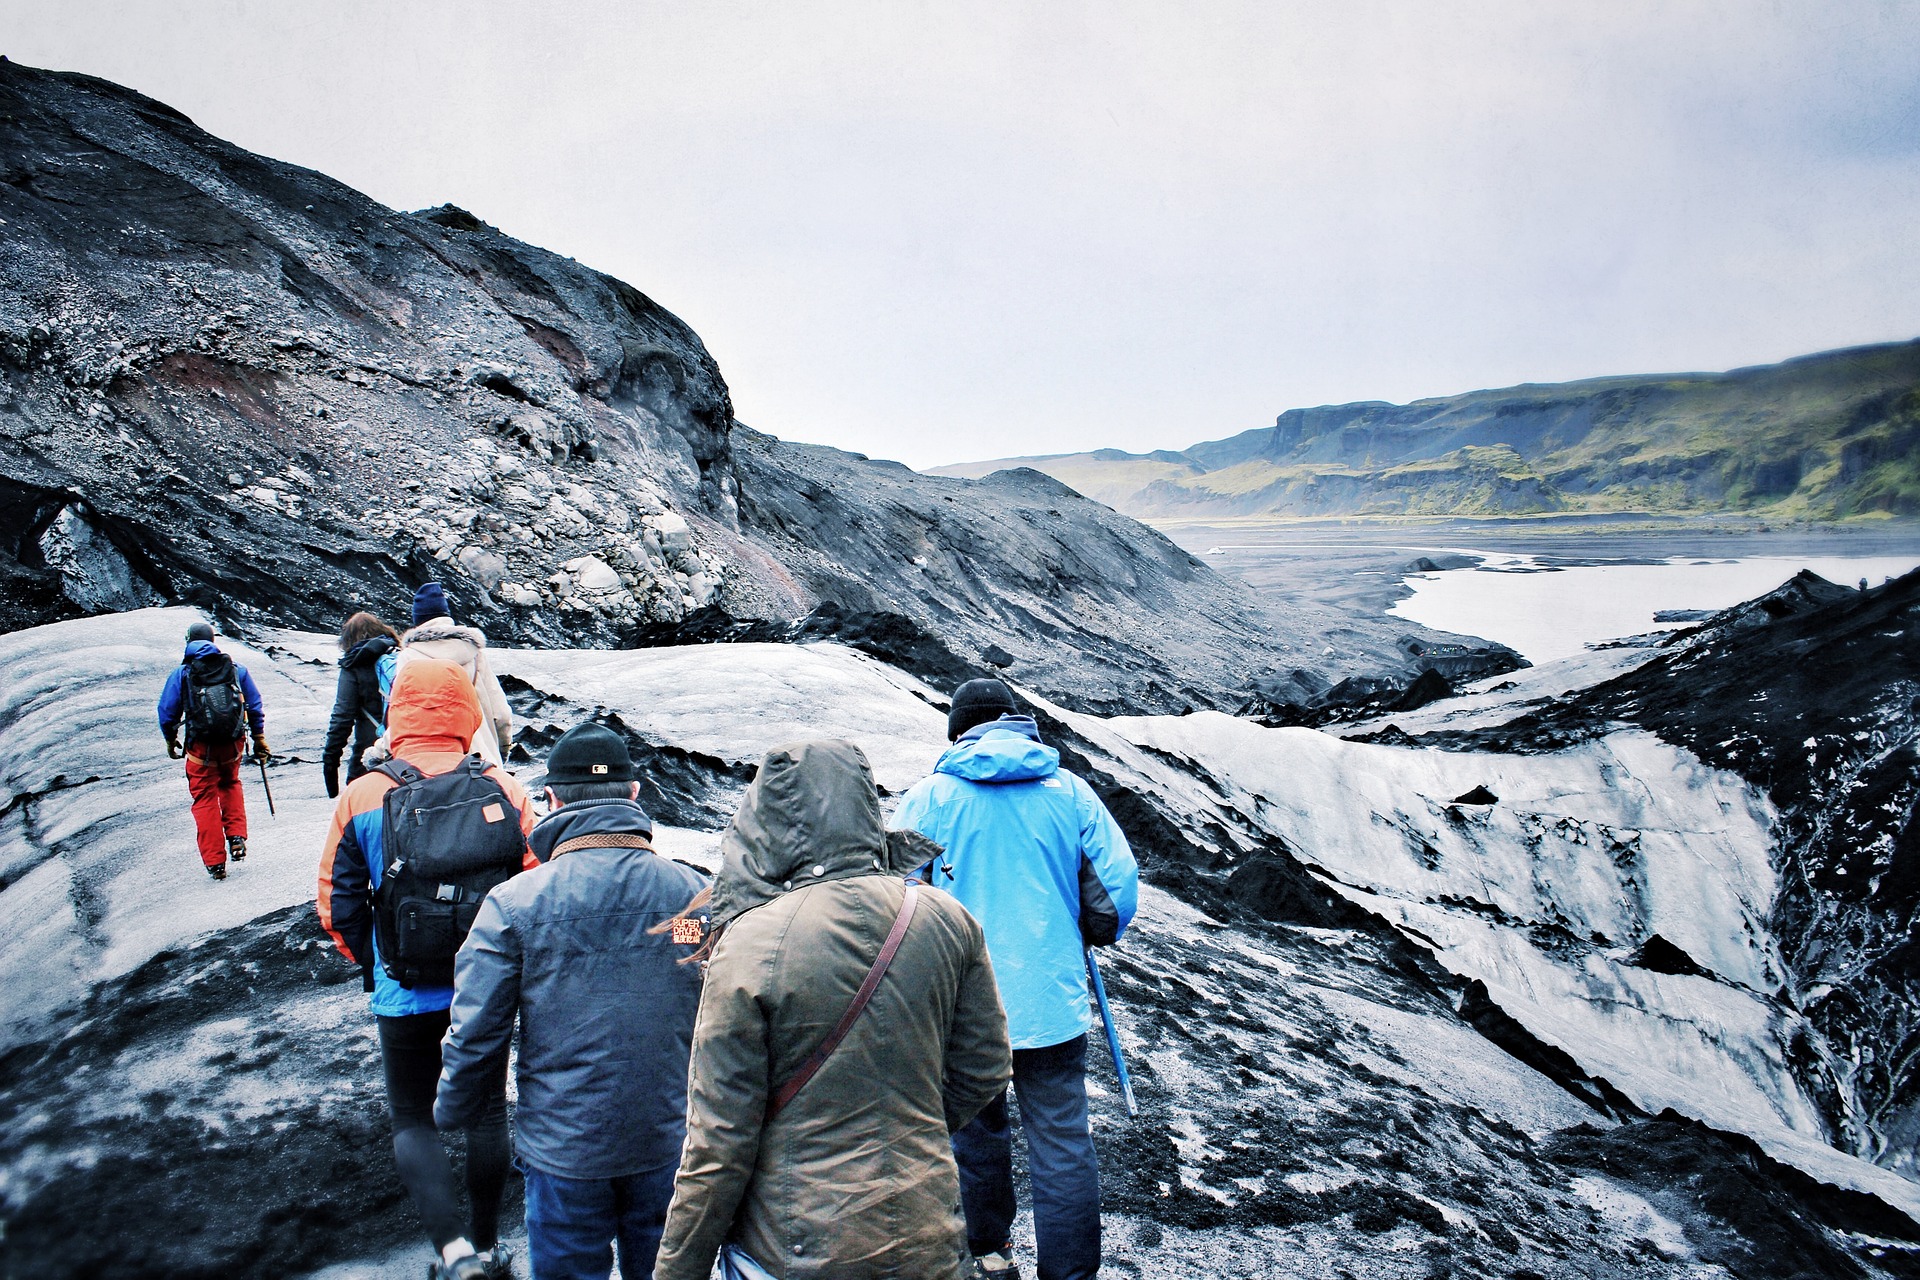 Glacier Hiking and Caving: Things You Need to Know About Iceland